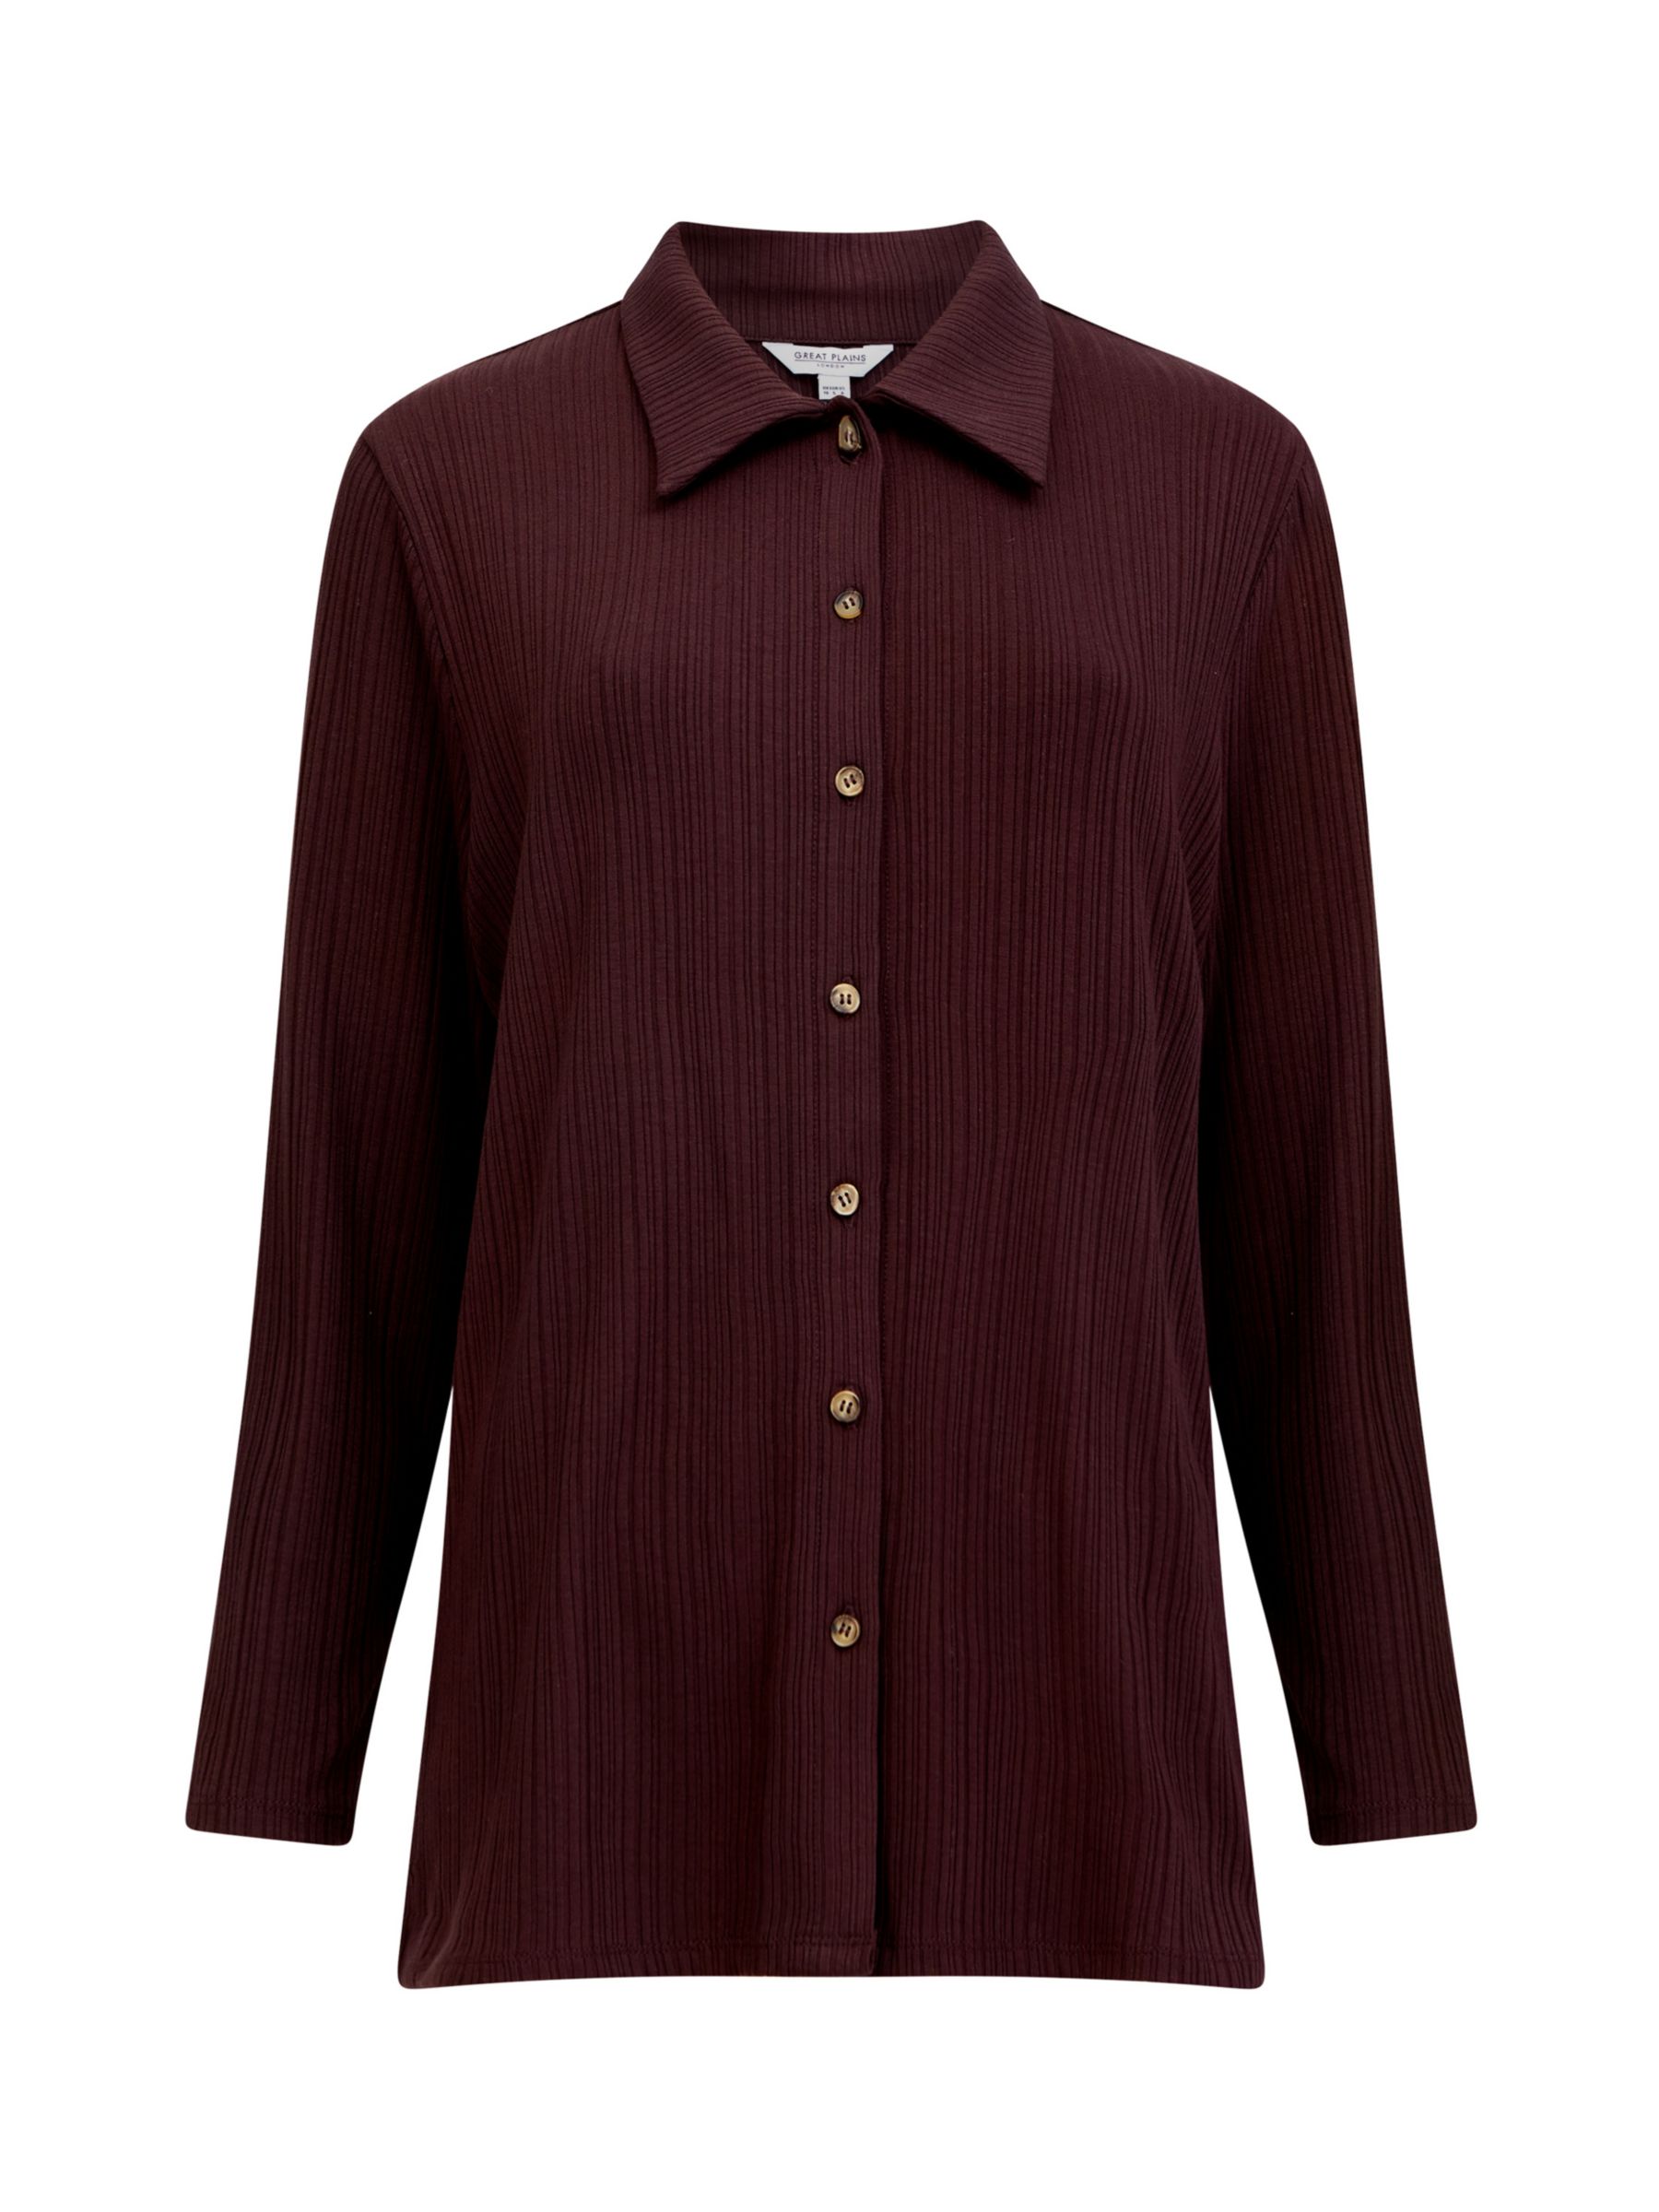 Buy Great Plains Modern Rib Jersey Shirt, Cocoa Online at johnlewis.com